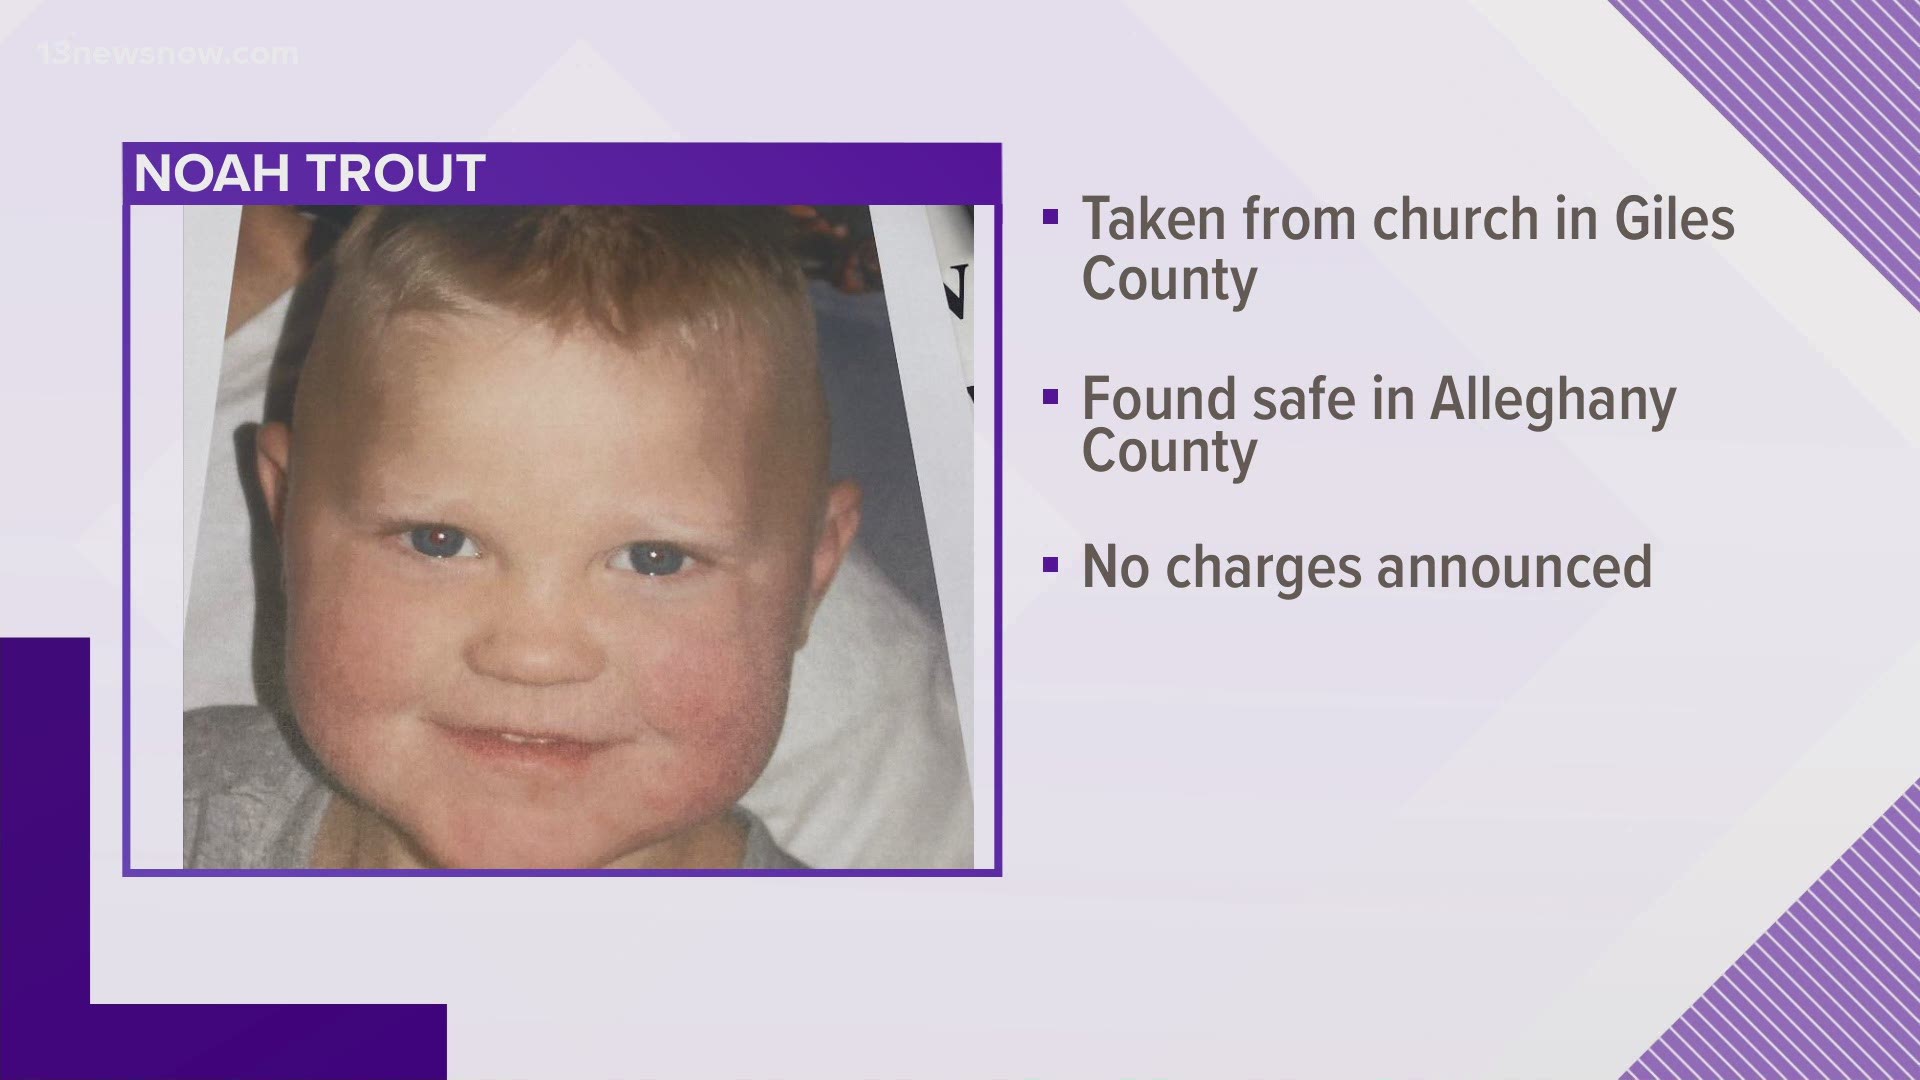 Authorities have safely located 2-year-old Noah Trout after someone abducted him from a church in Giles County, Virginia.